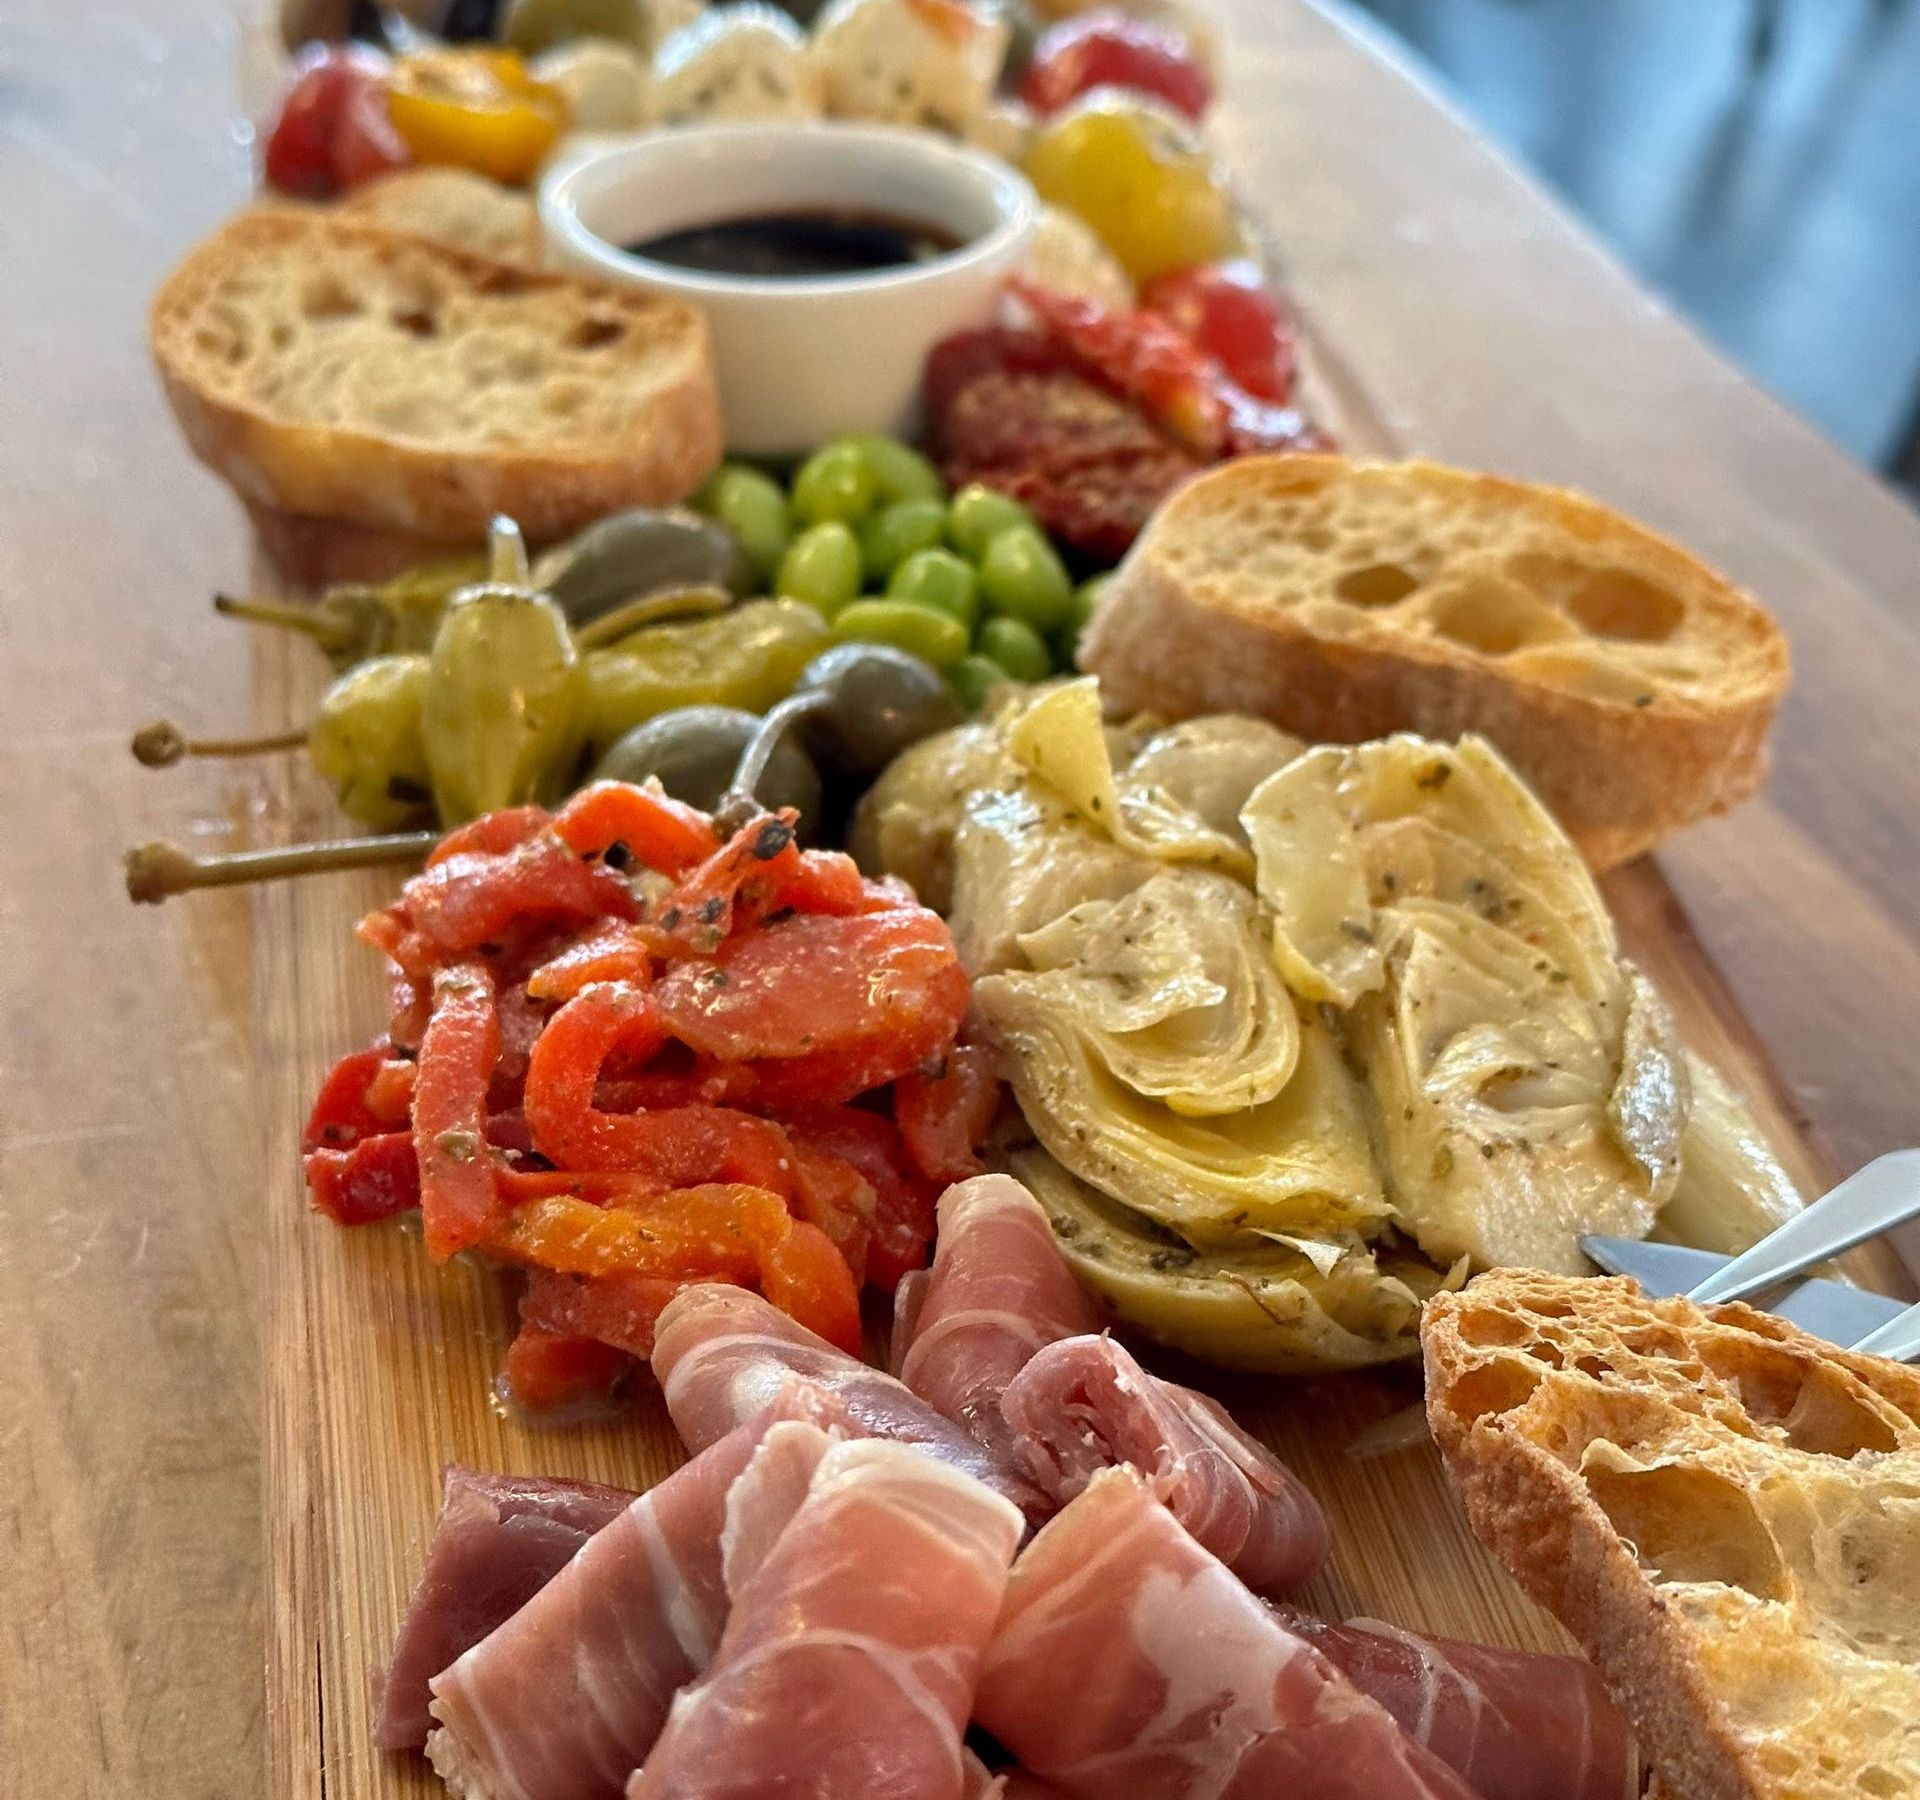 Closeup of antipasto or charcuterie board, including artichokes, red peppers, bread, cured meats, cheese, and tomatoes.